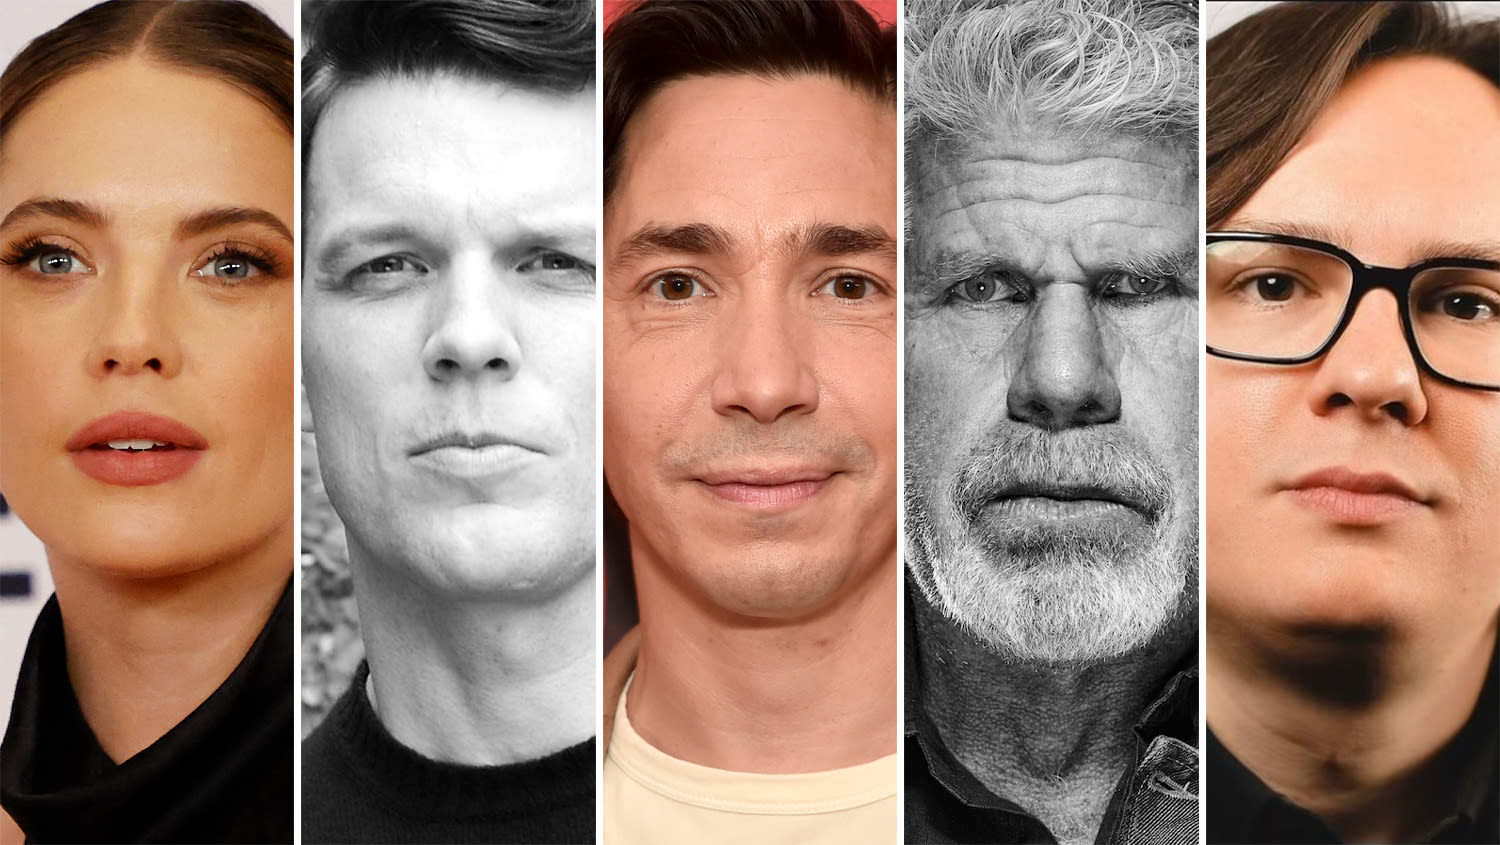 Ashley Benson, Jake Lacy, Justin Long & Ron Perlman To Topline Comedic Thriller ‘Stranglehold’ From Clark Duke, Yale Productions